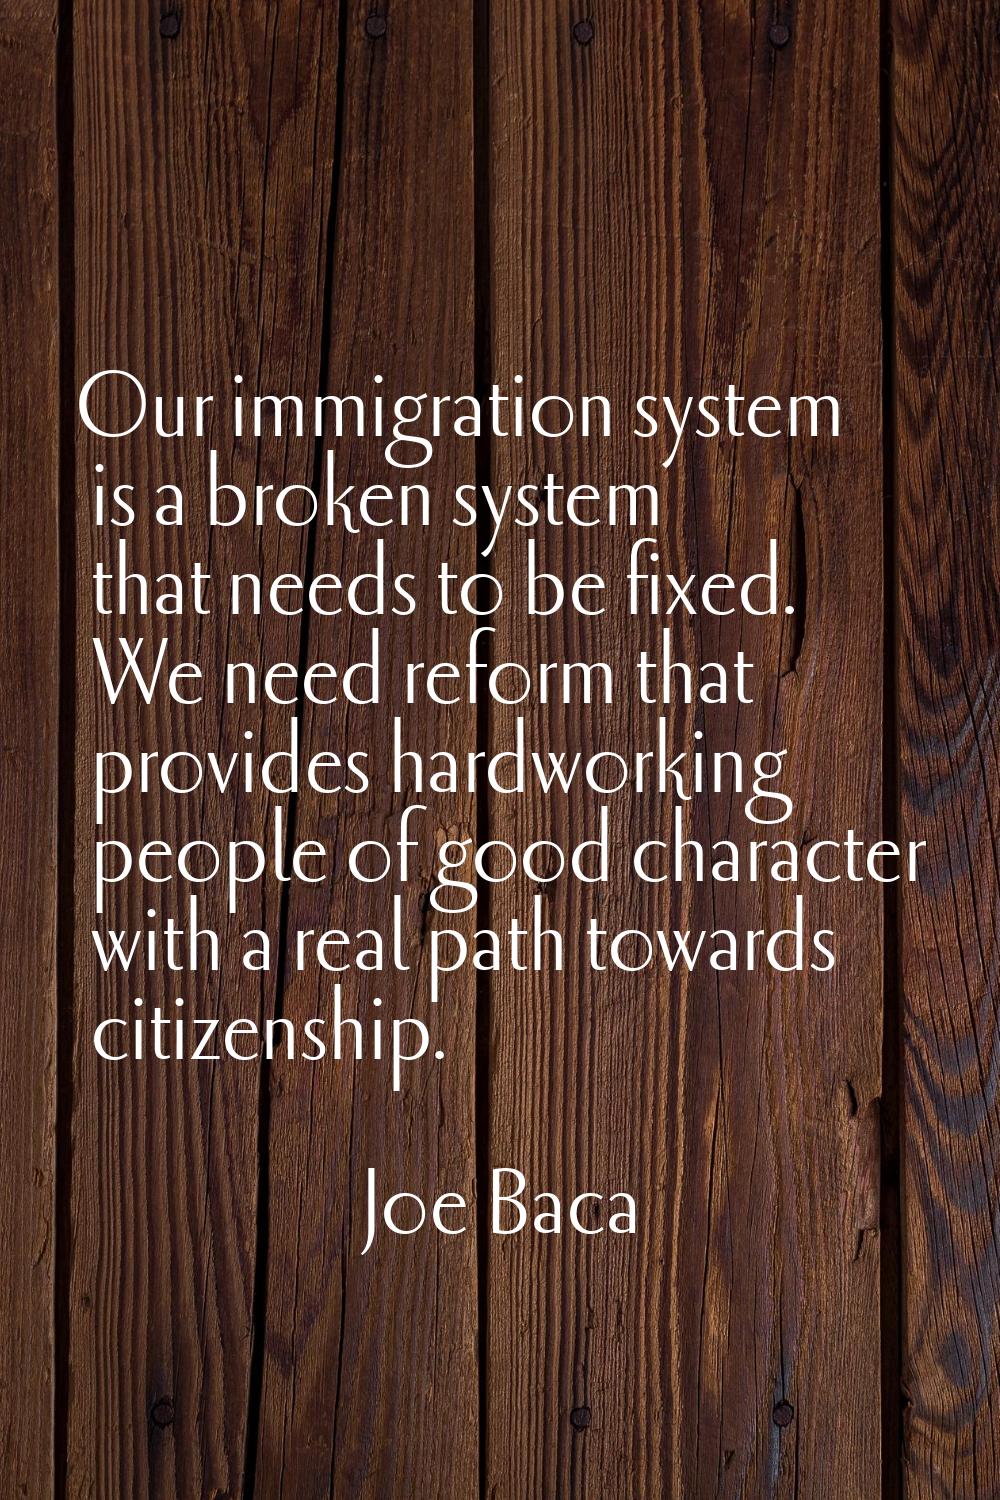 Our immigration system is a broken system that needs to be fixed. We need reform that provides hard